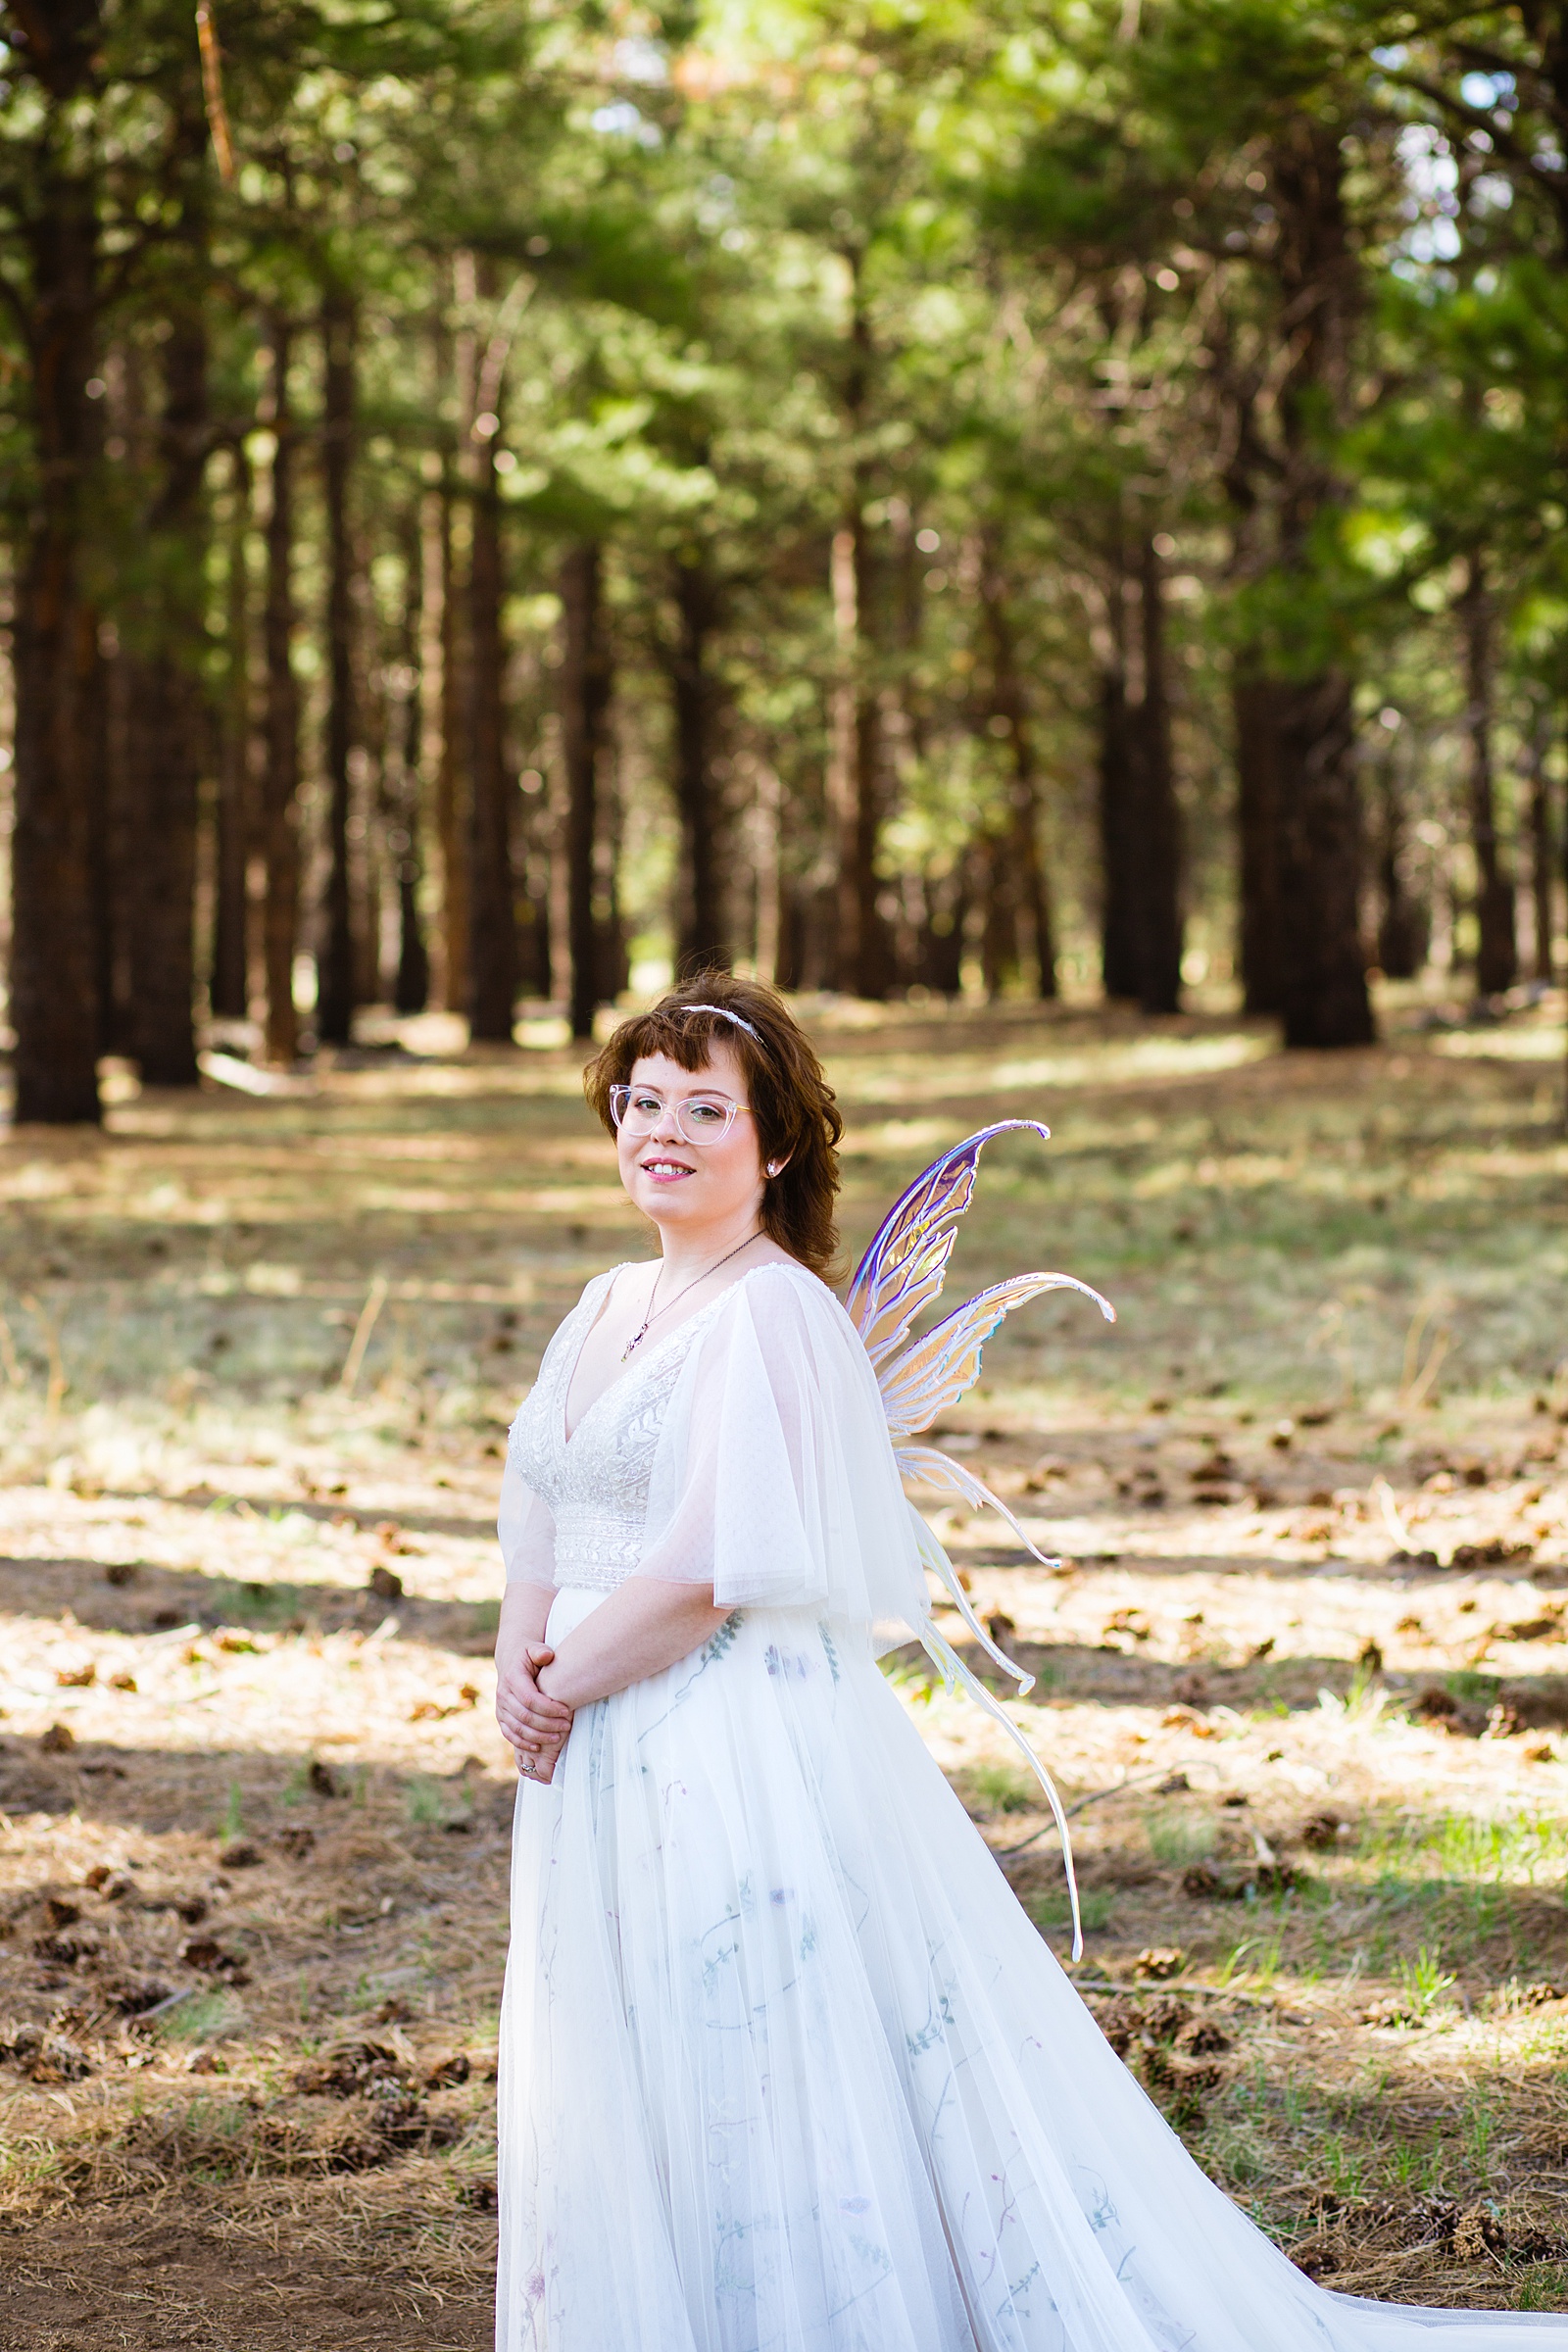 Bride at their fairy tale inspired wedding in fairy wings by Flagstaff wedding photographer PMA Photography.